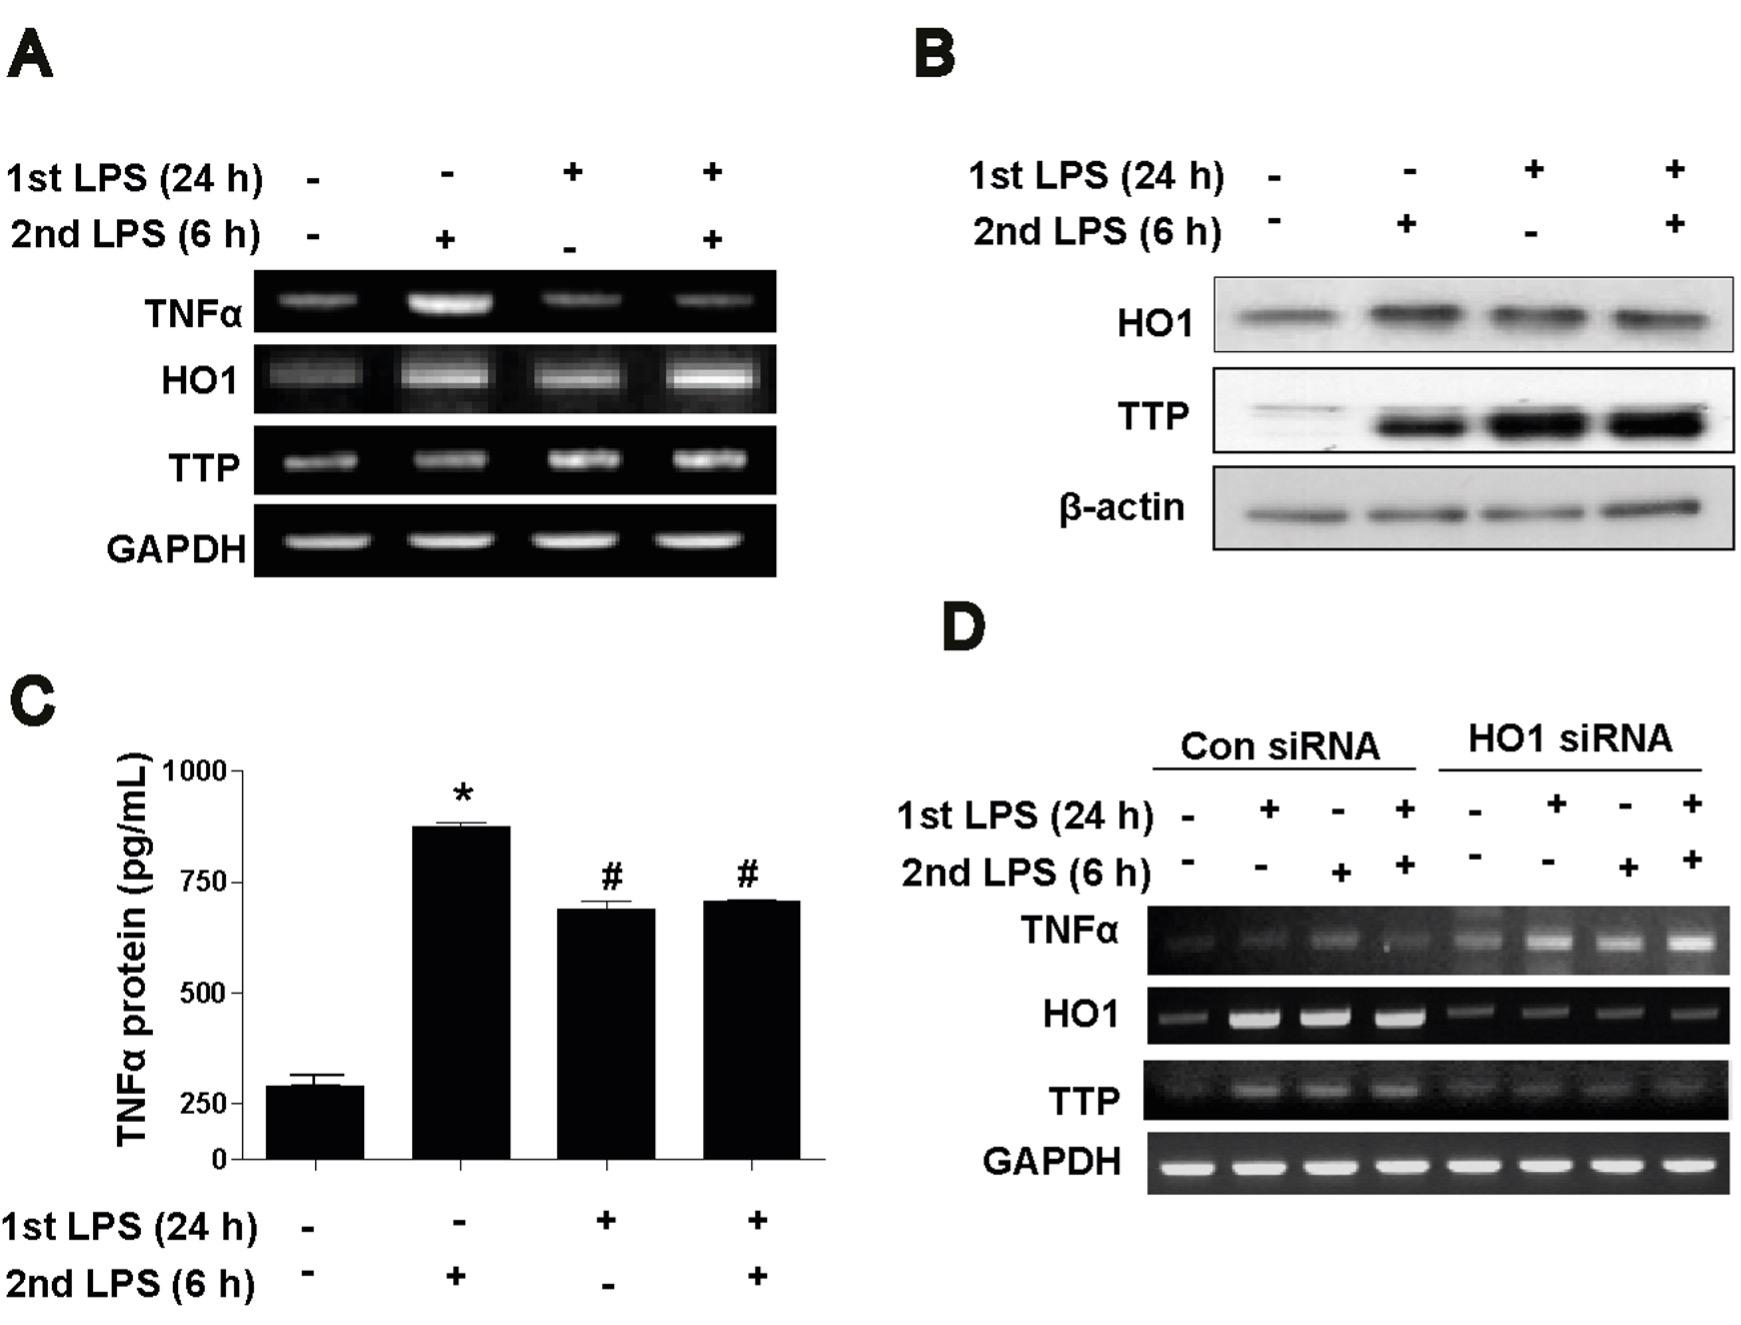 Lipopolysaccharide tolerance attenuates inflammatory responses by increasing heme oxygenase-1 and tristetraprolin expression in Raw264.7 macrophages